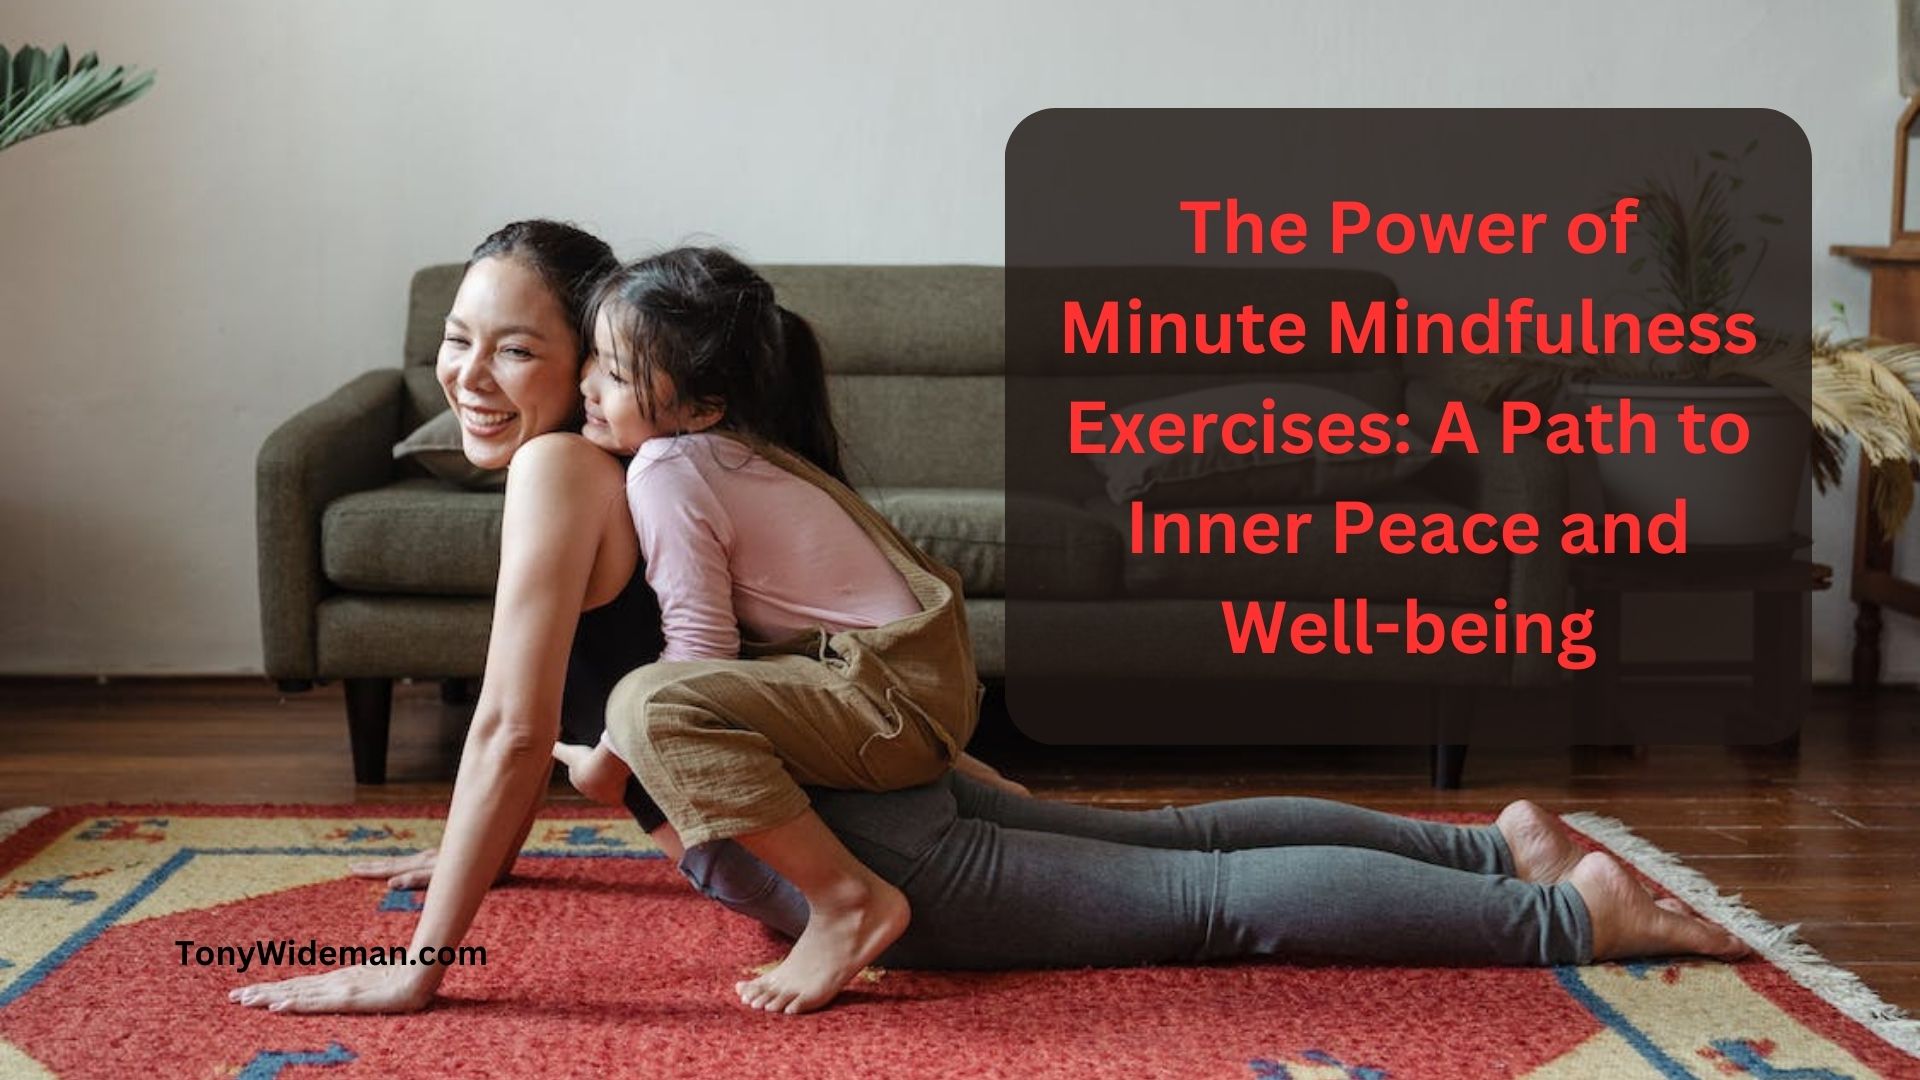 The Power of Minute Mindfulness Exercises: A Path to Inner Peace and Well-being